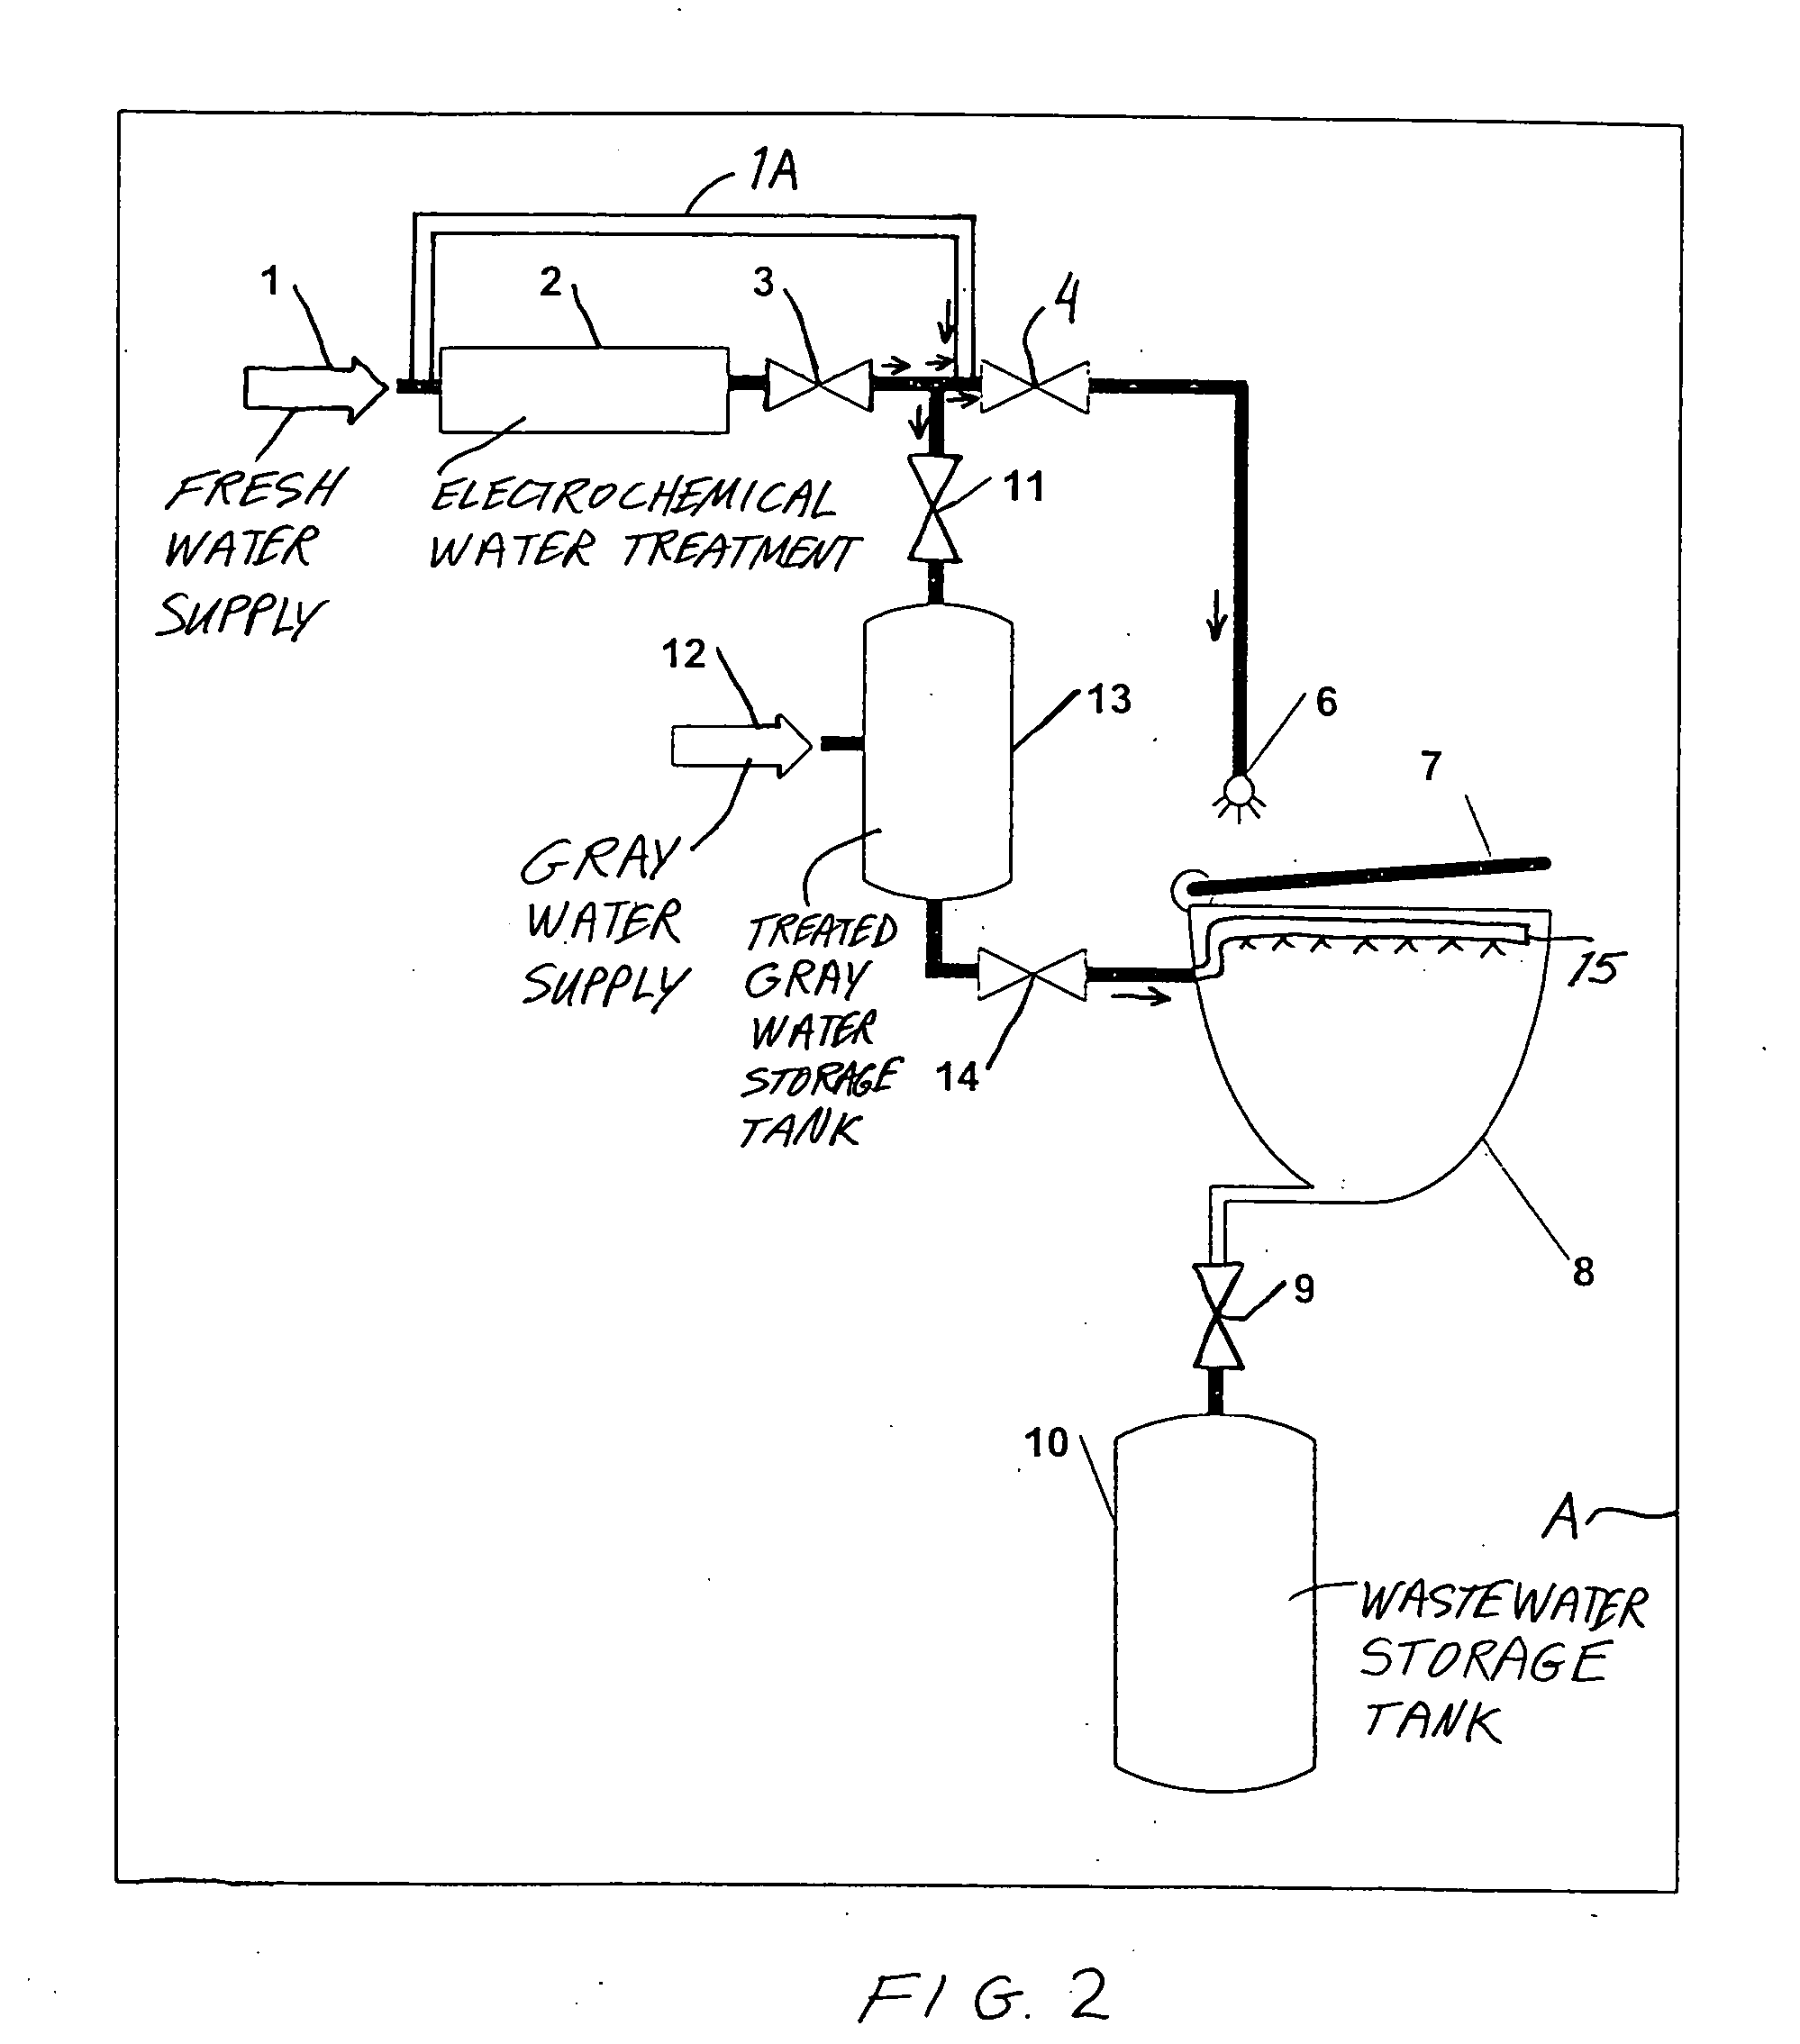 Method and apparatus for cleaning and disinfecting a toilet system in a transport vehicle such as a passenger aircraft